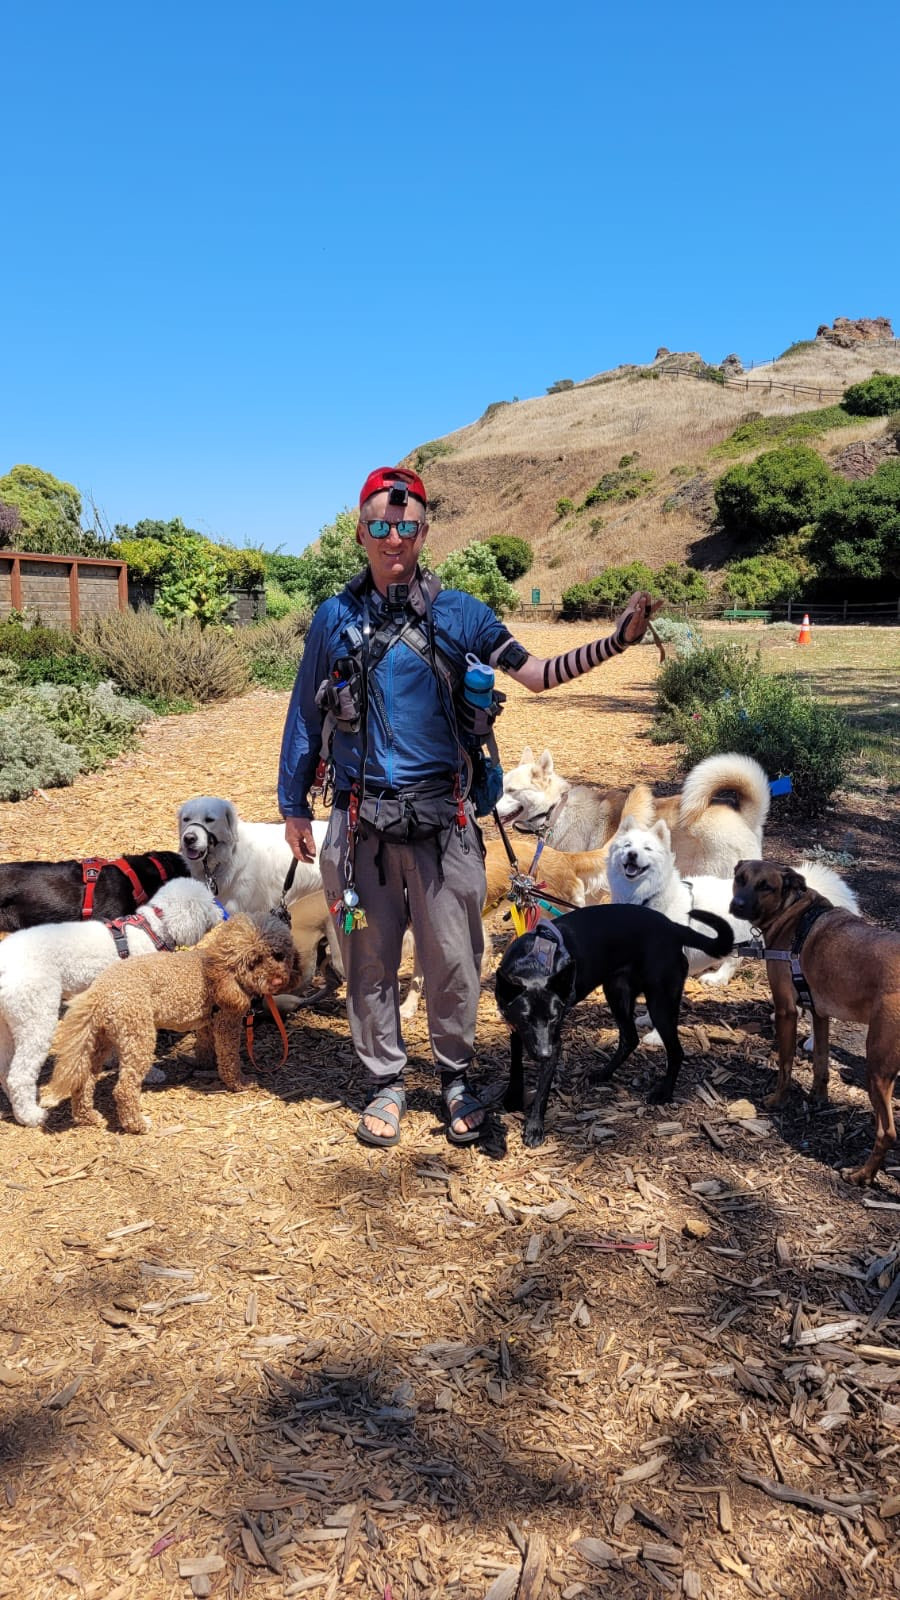 A male Caucasian dog walker wearing a red hat, blue t-shirt and grey pants. 8 dogs surround him, and some of them are leashed to his body. The ground is covered in woodchips and there’s a sharp hill in the background. The sky is blue.